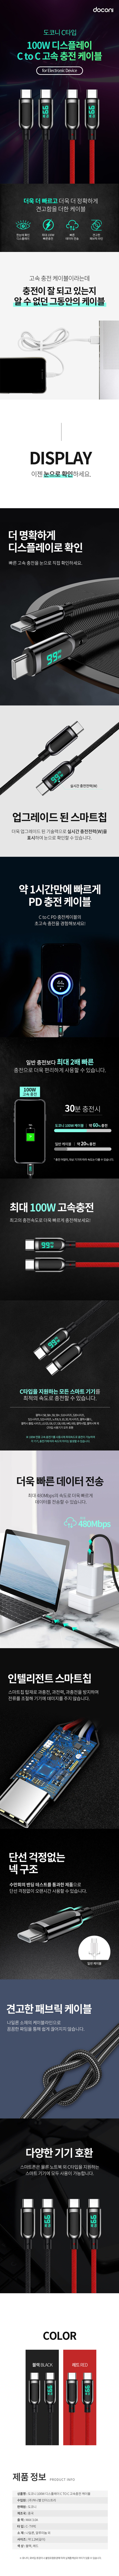 DP_cable100w.jpg